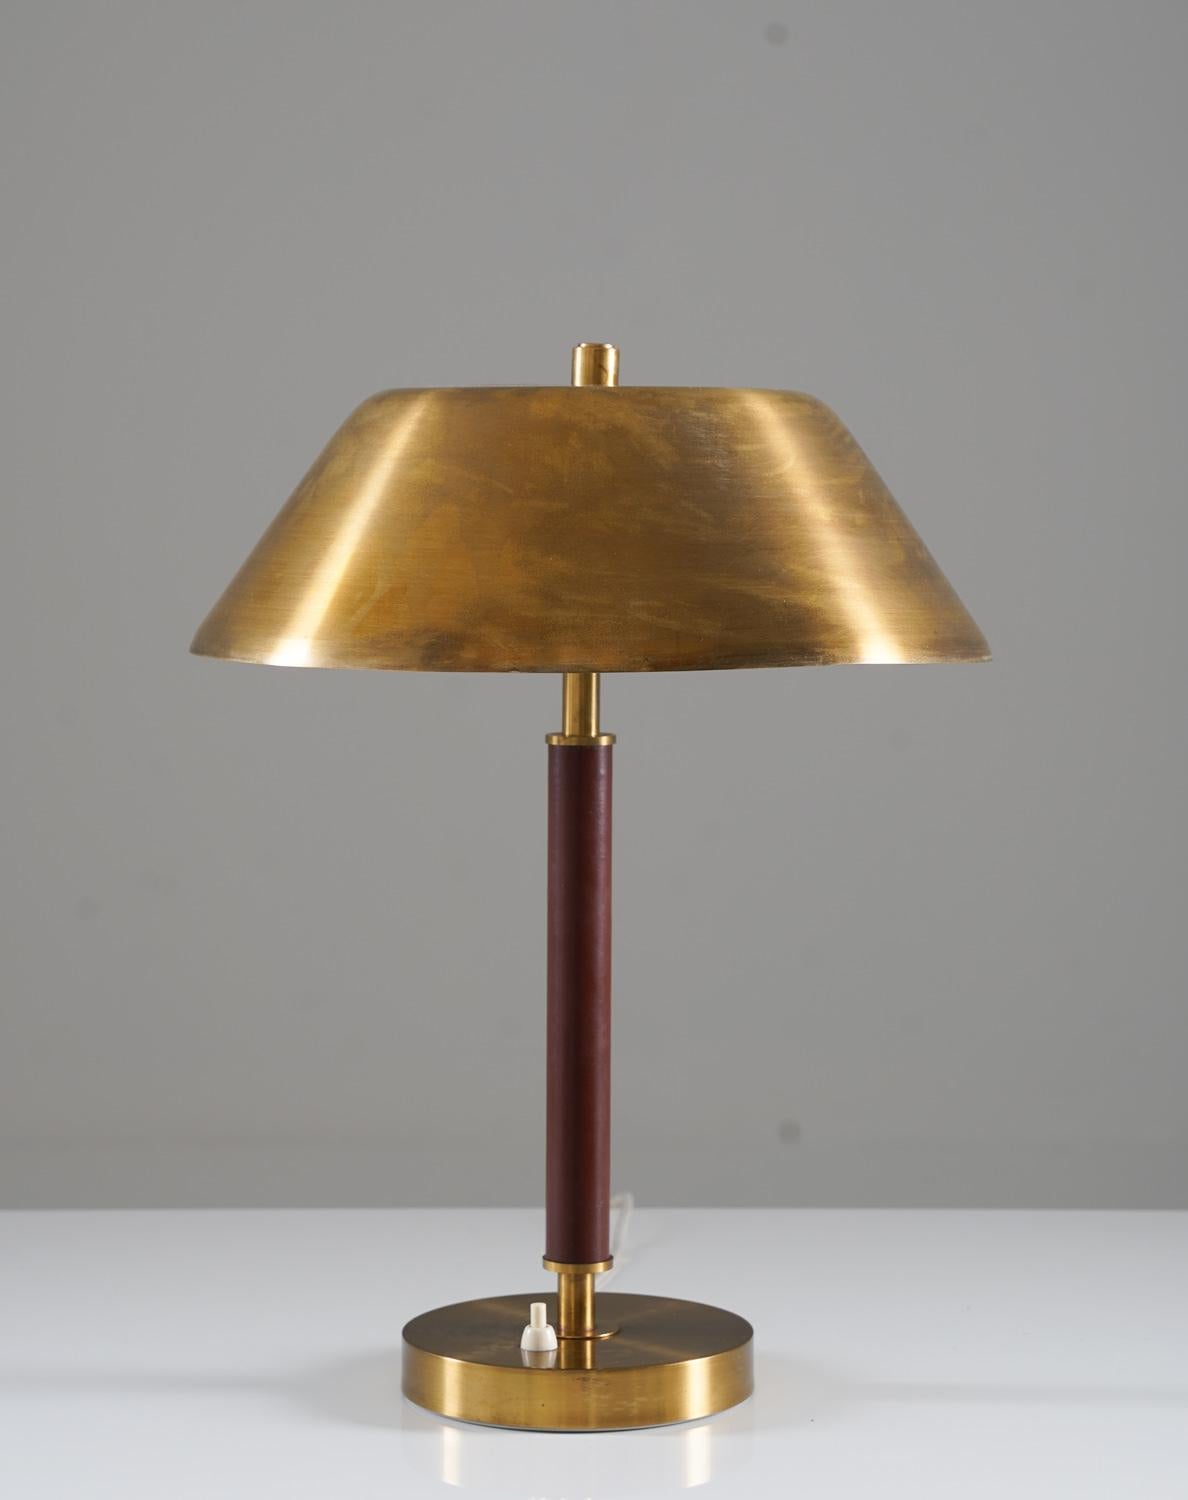 Beautiful table lamp manufactured by Falkenbergs Belysning, circa 1960.
This lamp is made of brass with a leather-covered base.

Condition: Good original condition with beautiful patina on the brass. The shade is slightly askew and has a minor